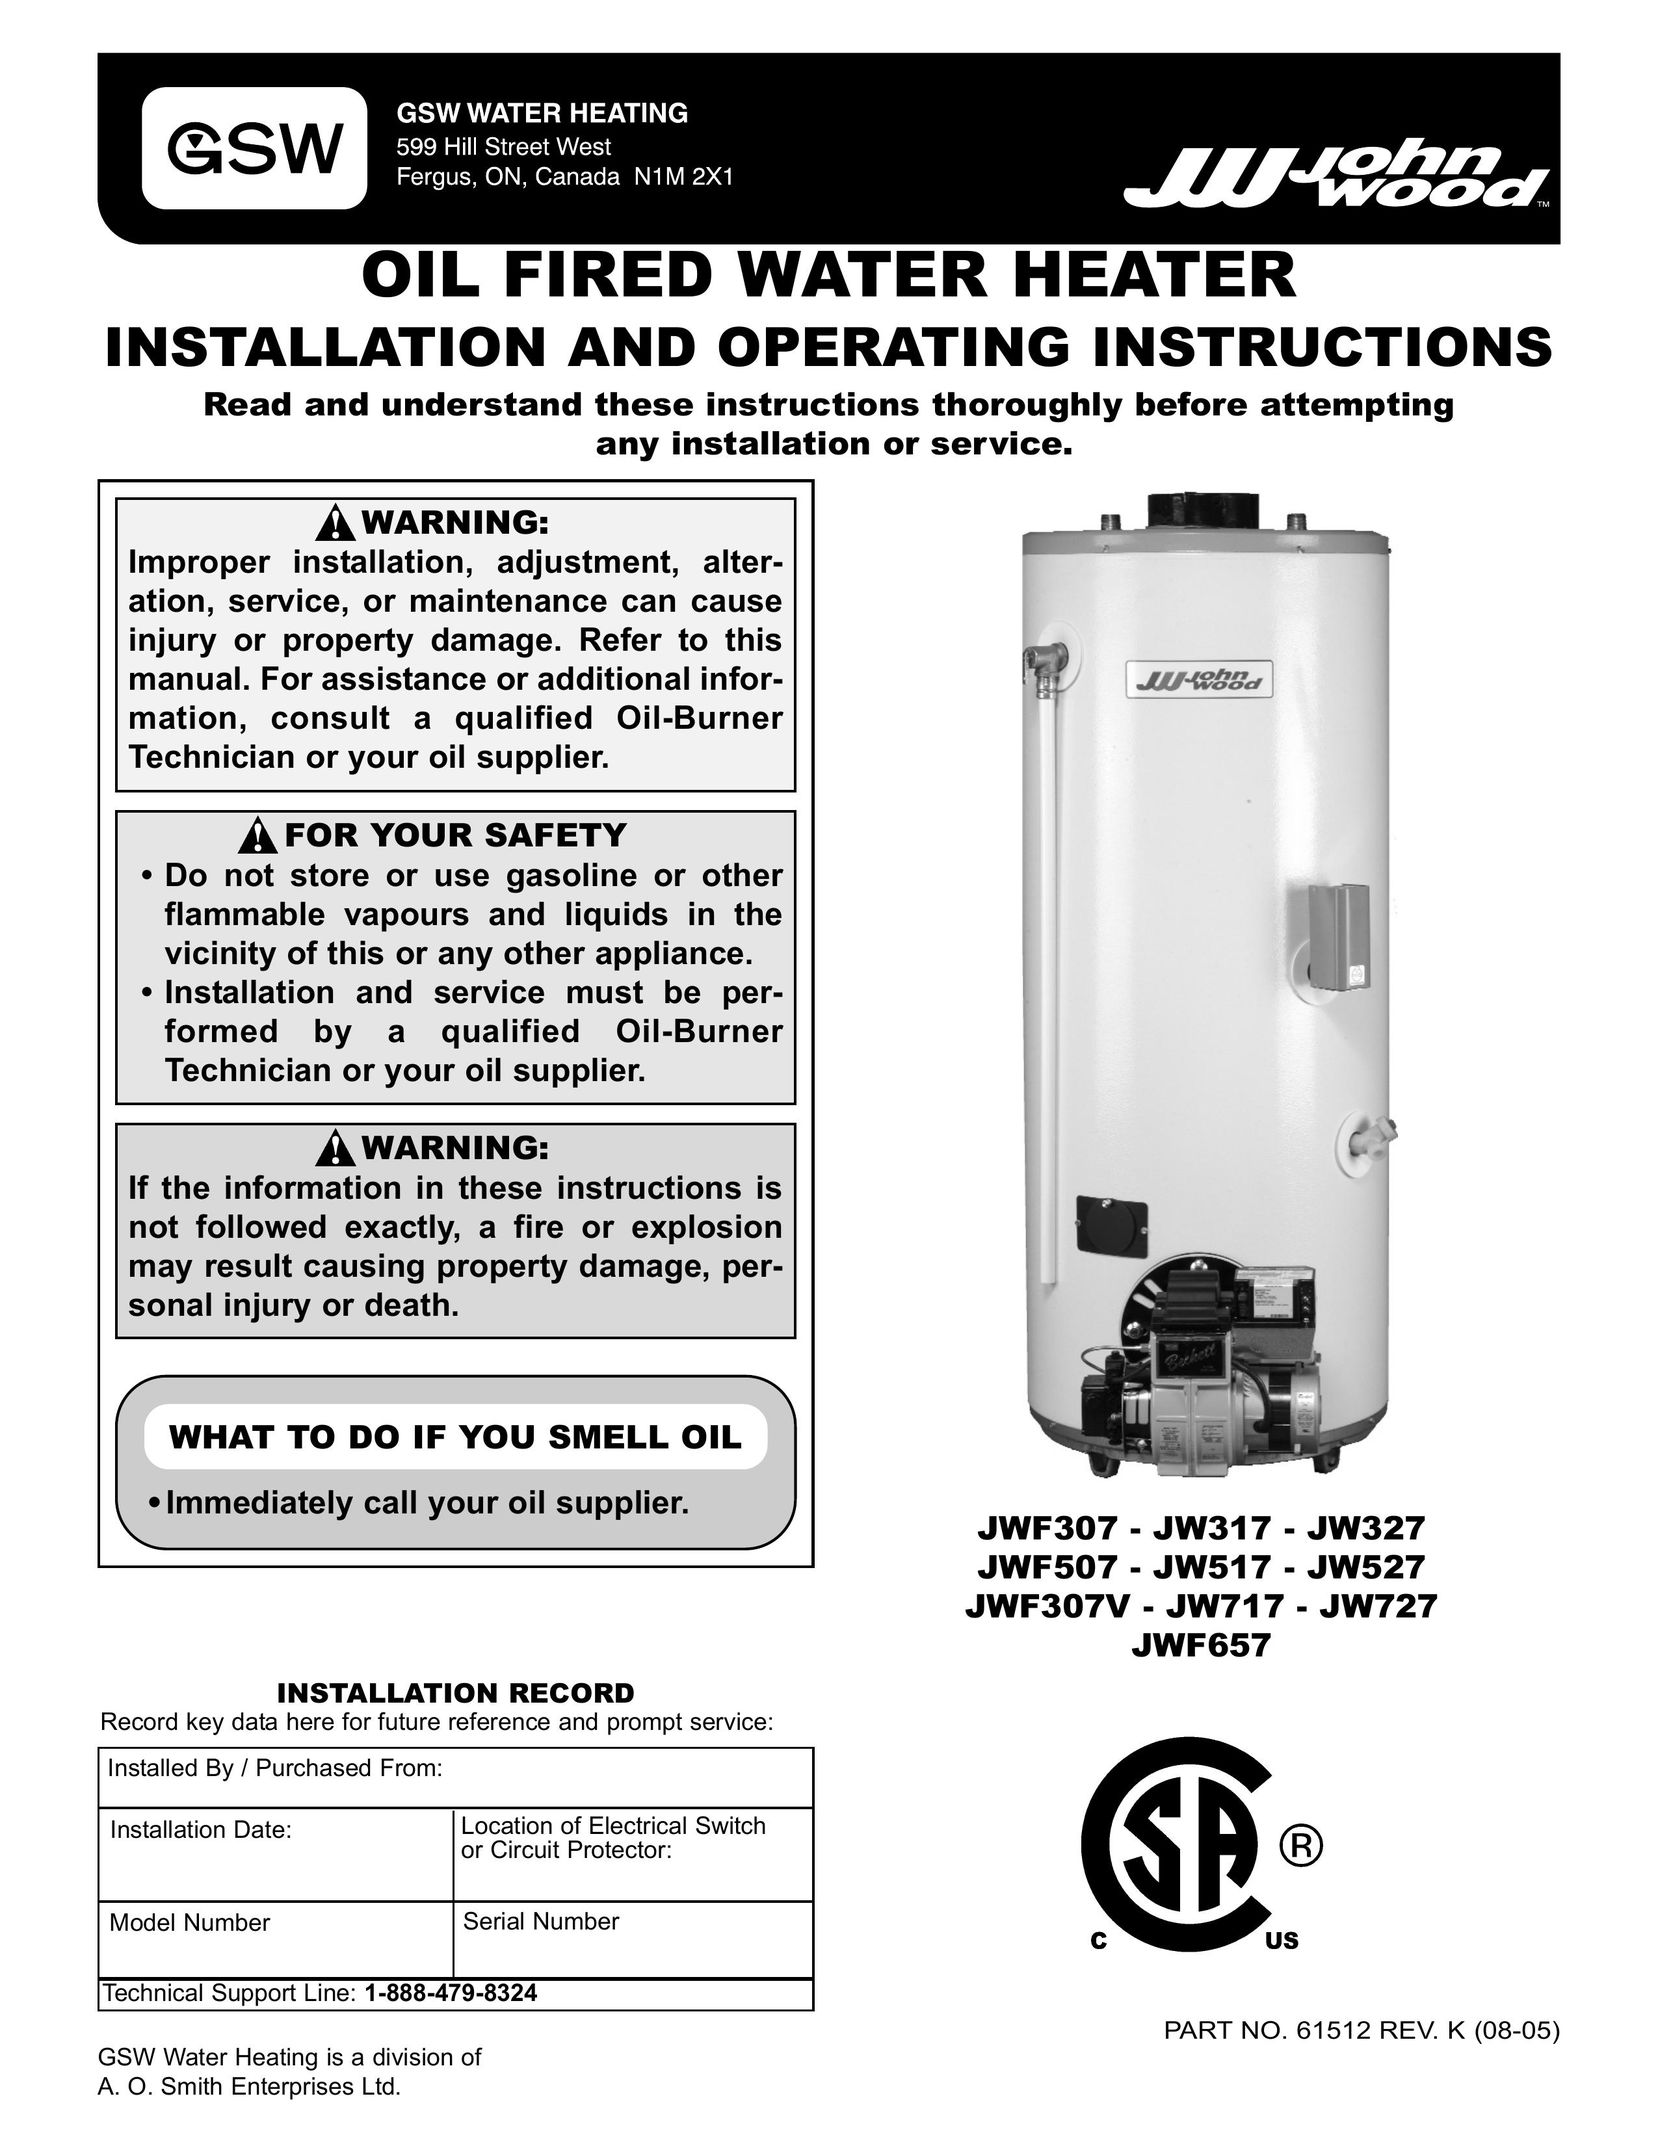 Smith Cast Iron Boilers JWF307 Water Heater User Manual